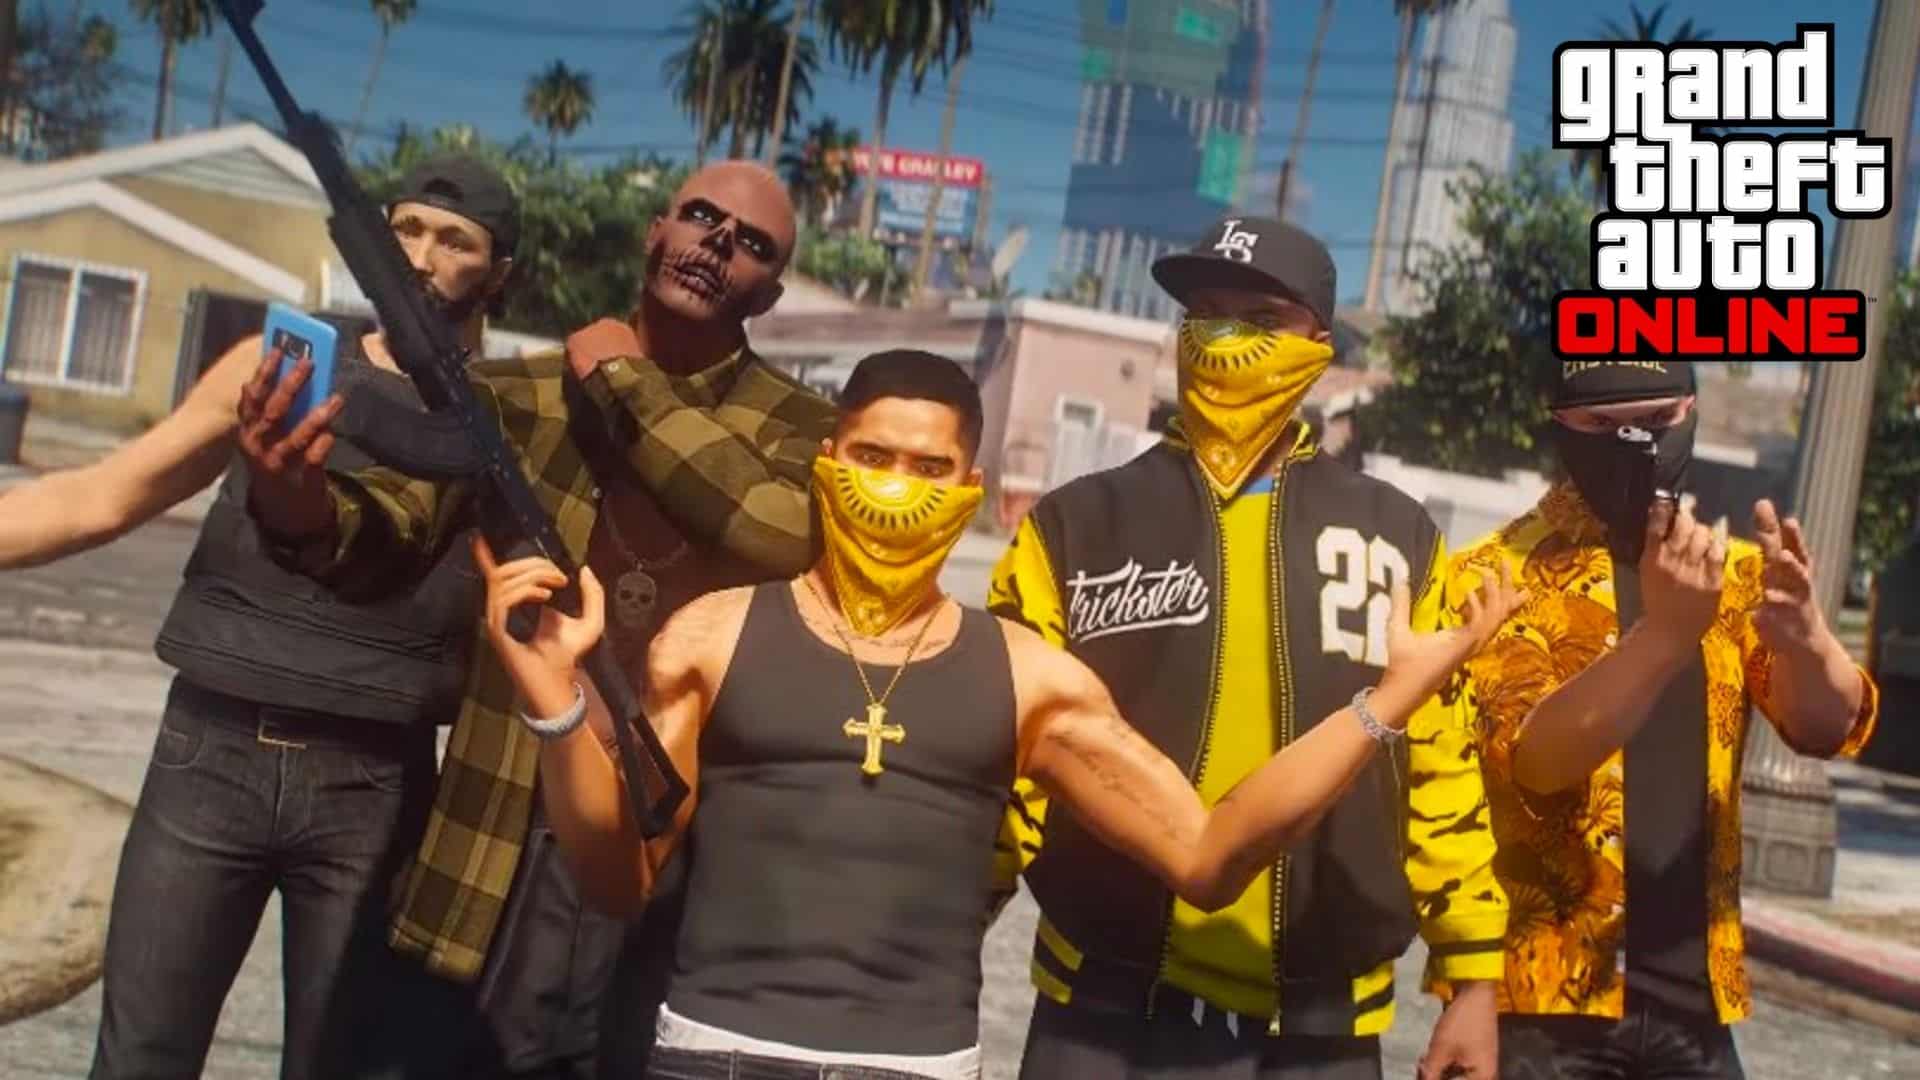 GTA Online vagos gang in yellow posing with weapons